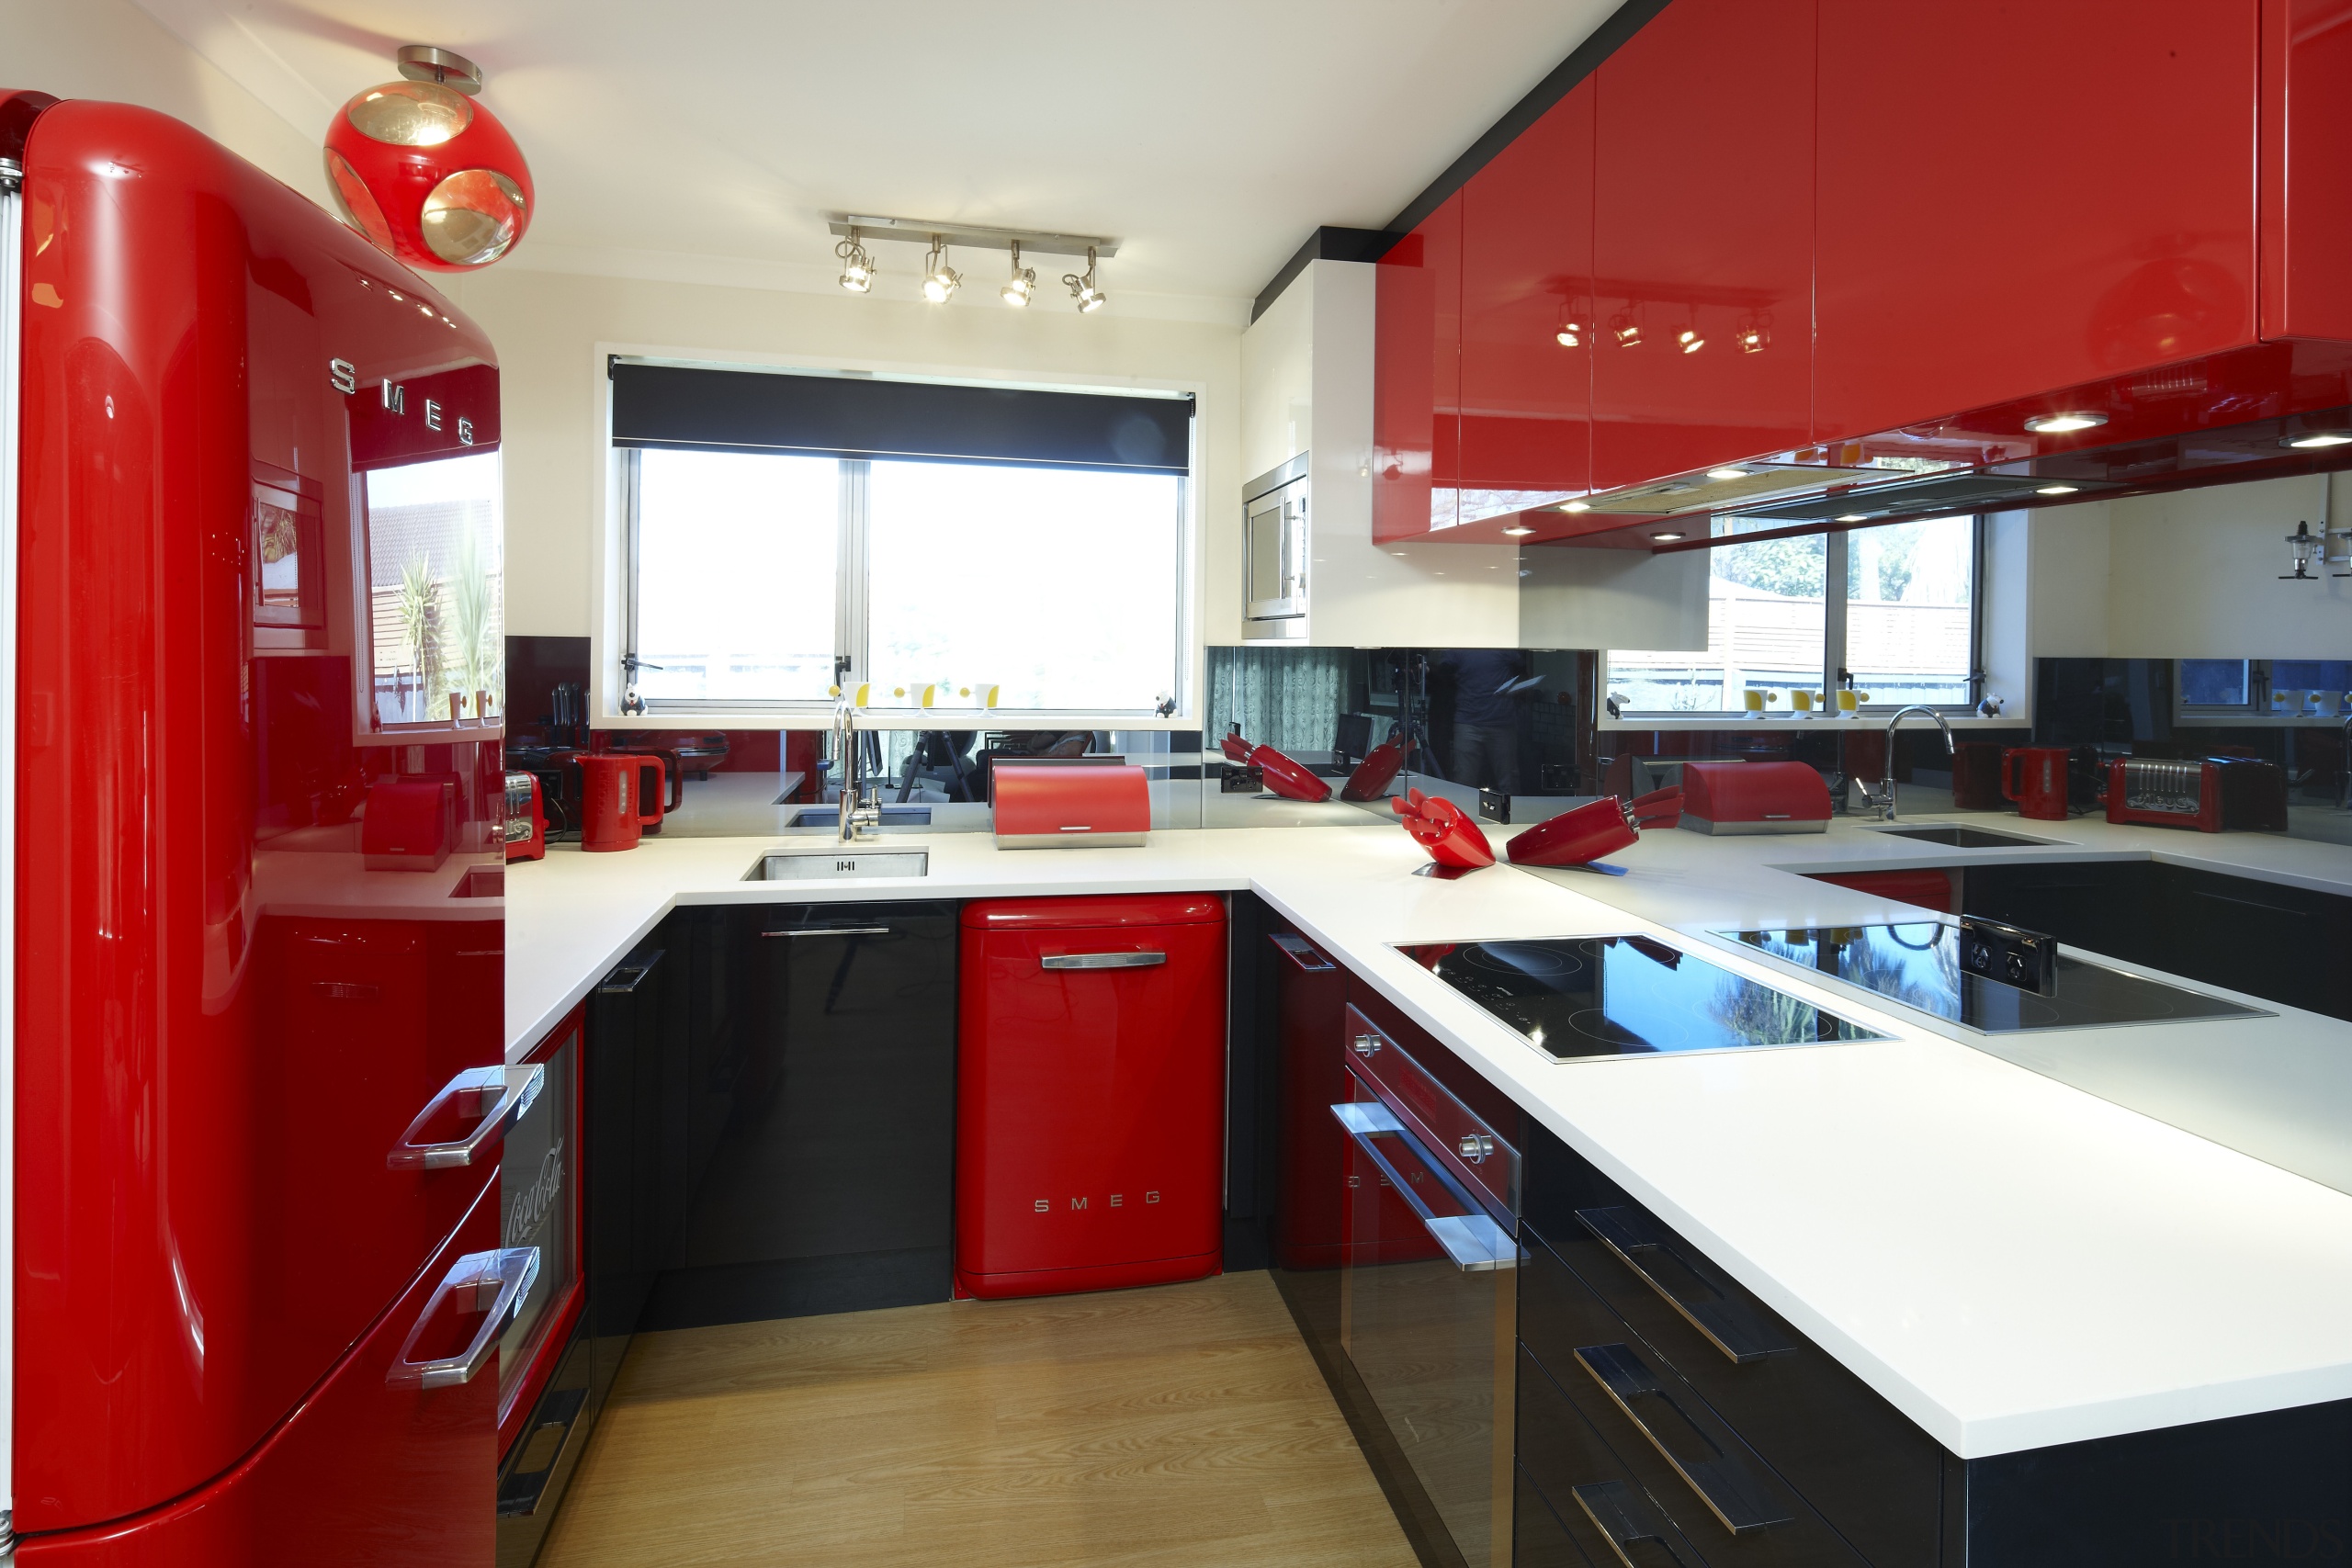 Another view of the kitchen. - Another view countertop, interior design, kitchen, room, red, white